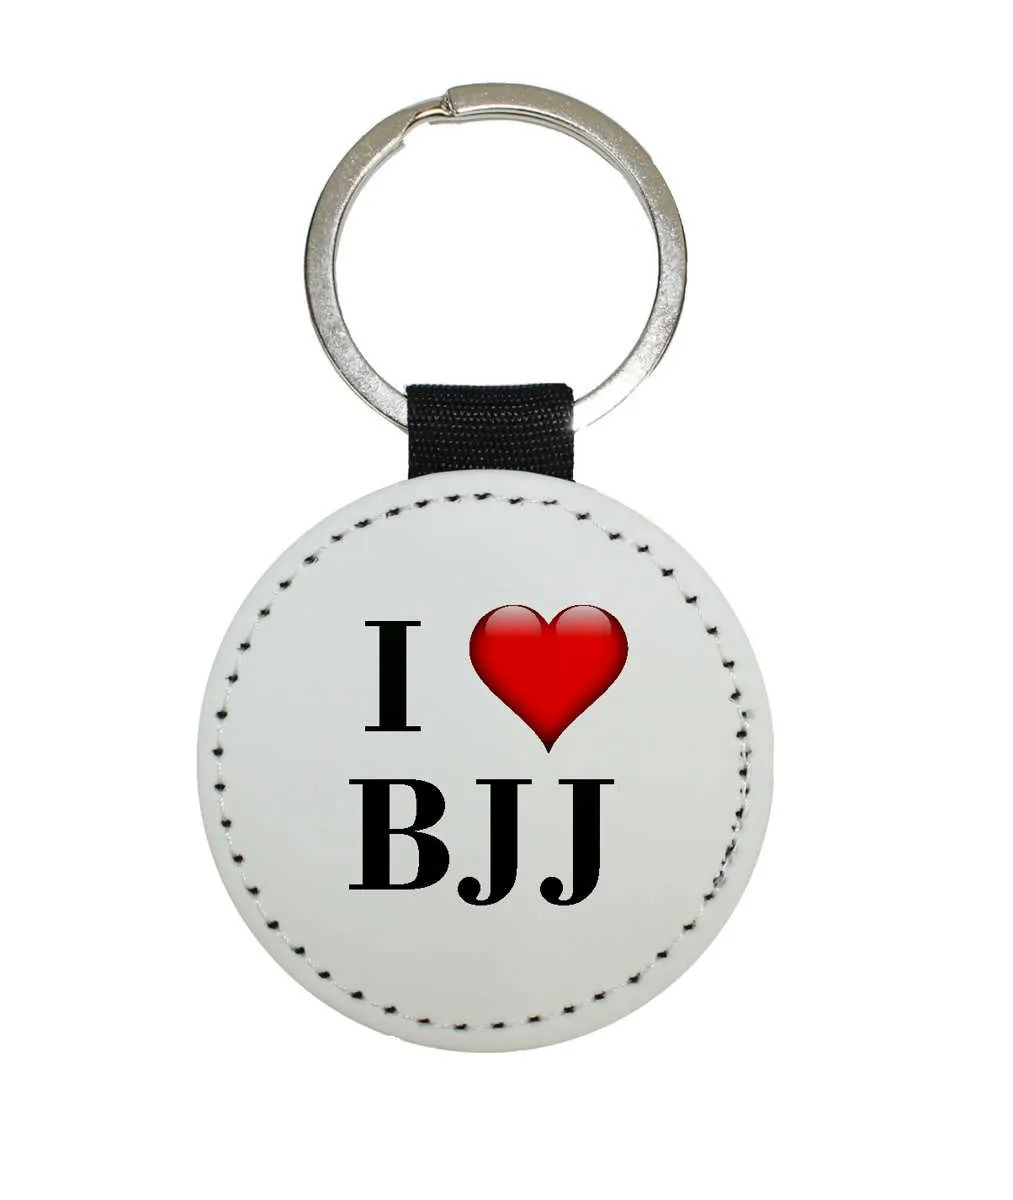 Key rings in different colors motif I Love BJJ